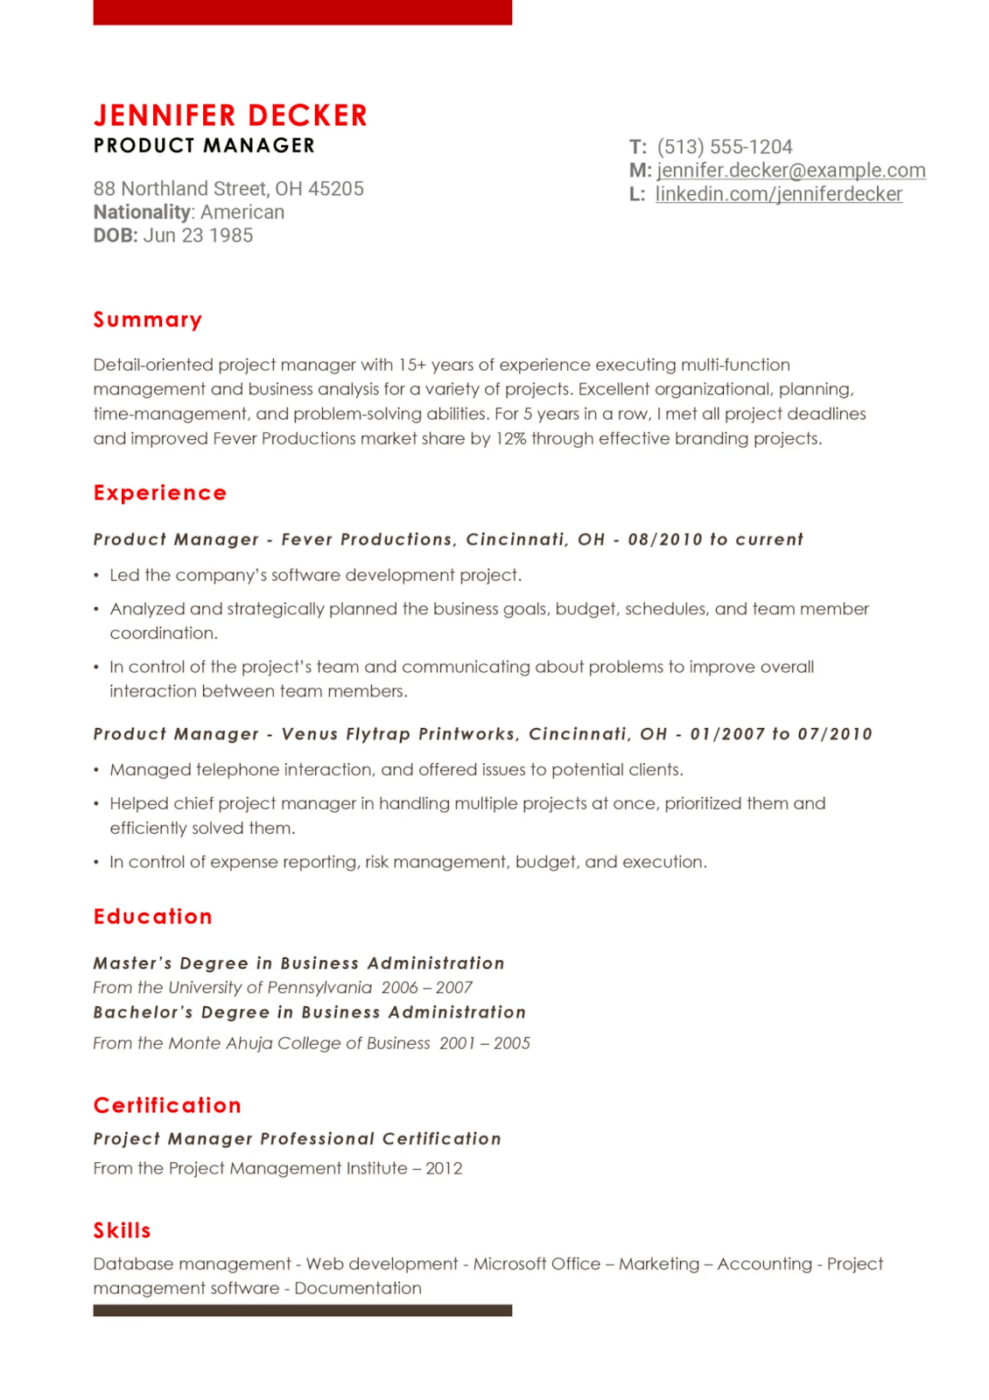  Project Manager Resume Template by Resume Giants